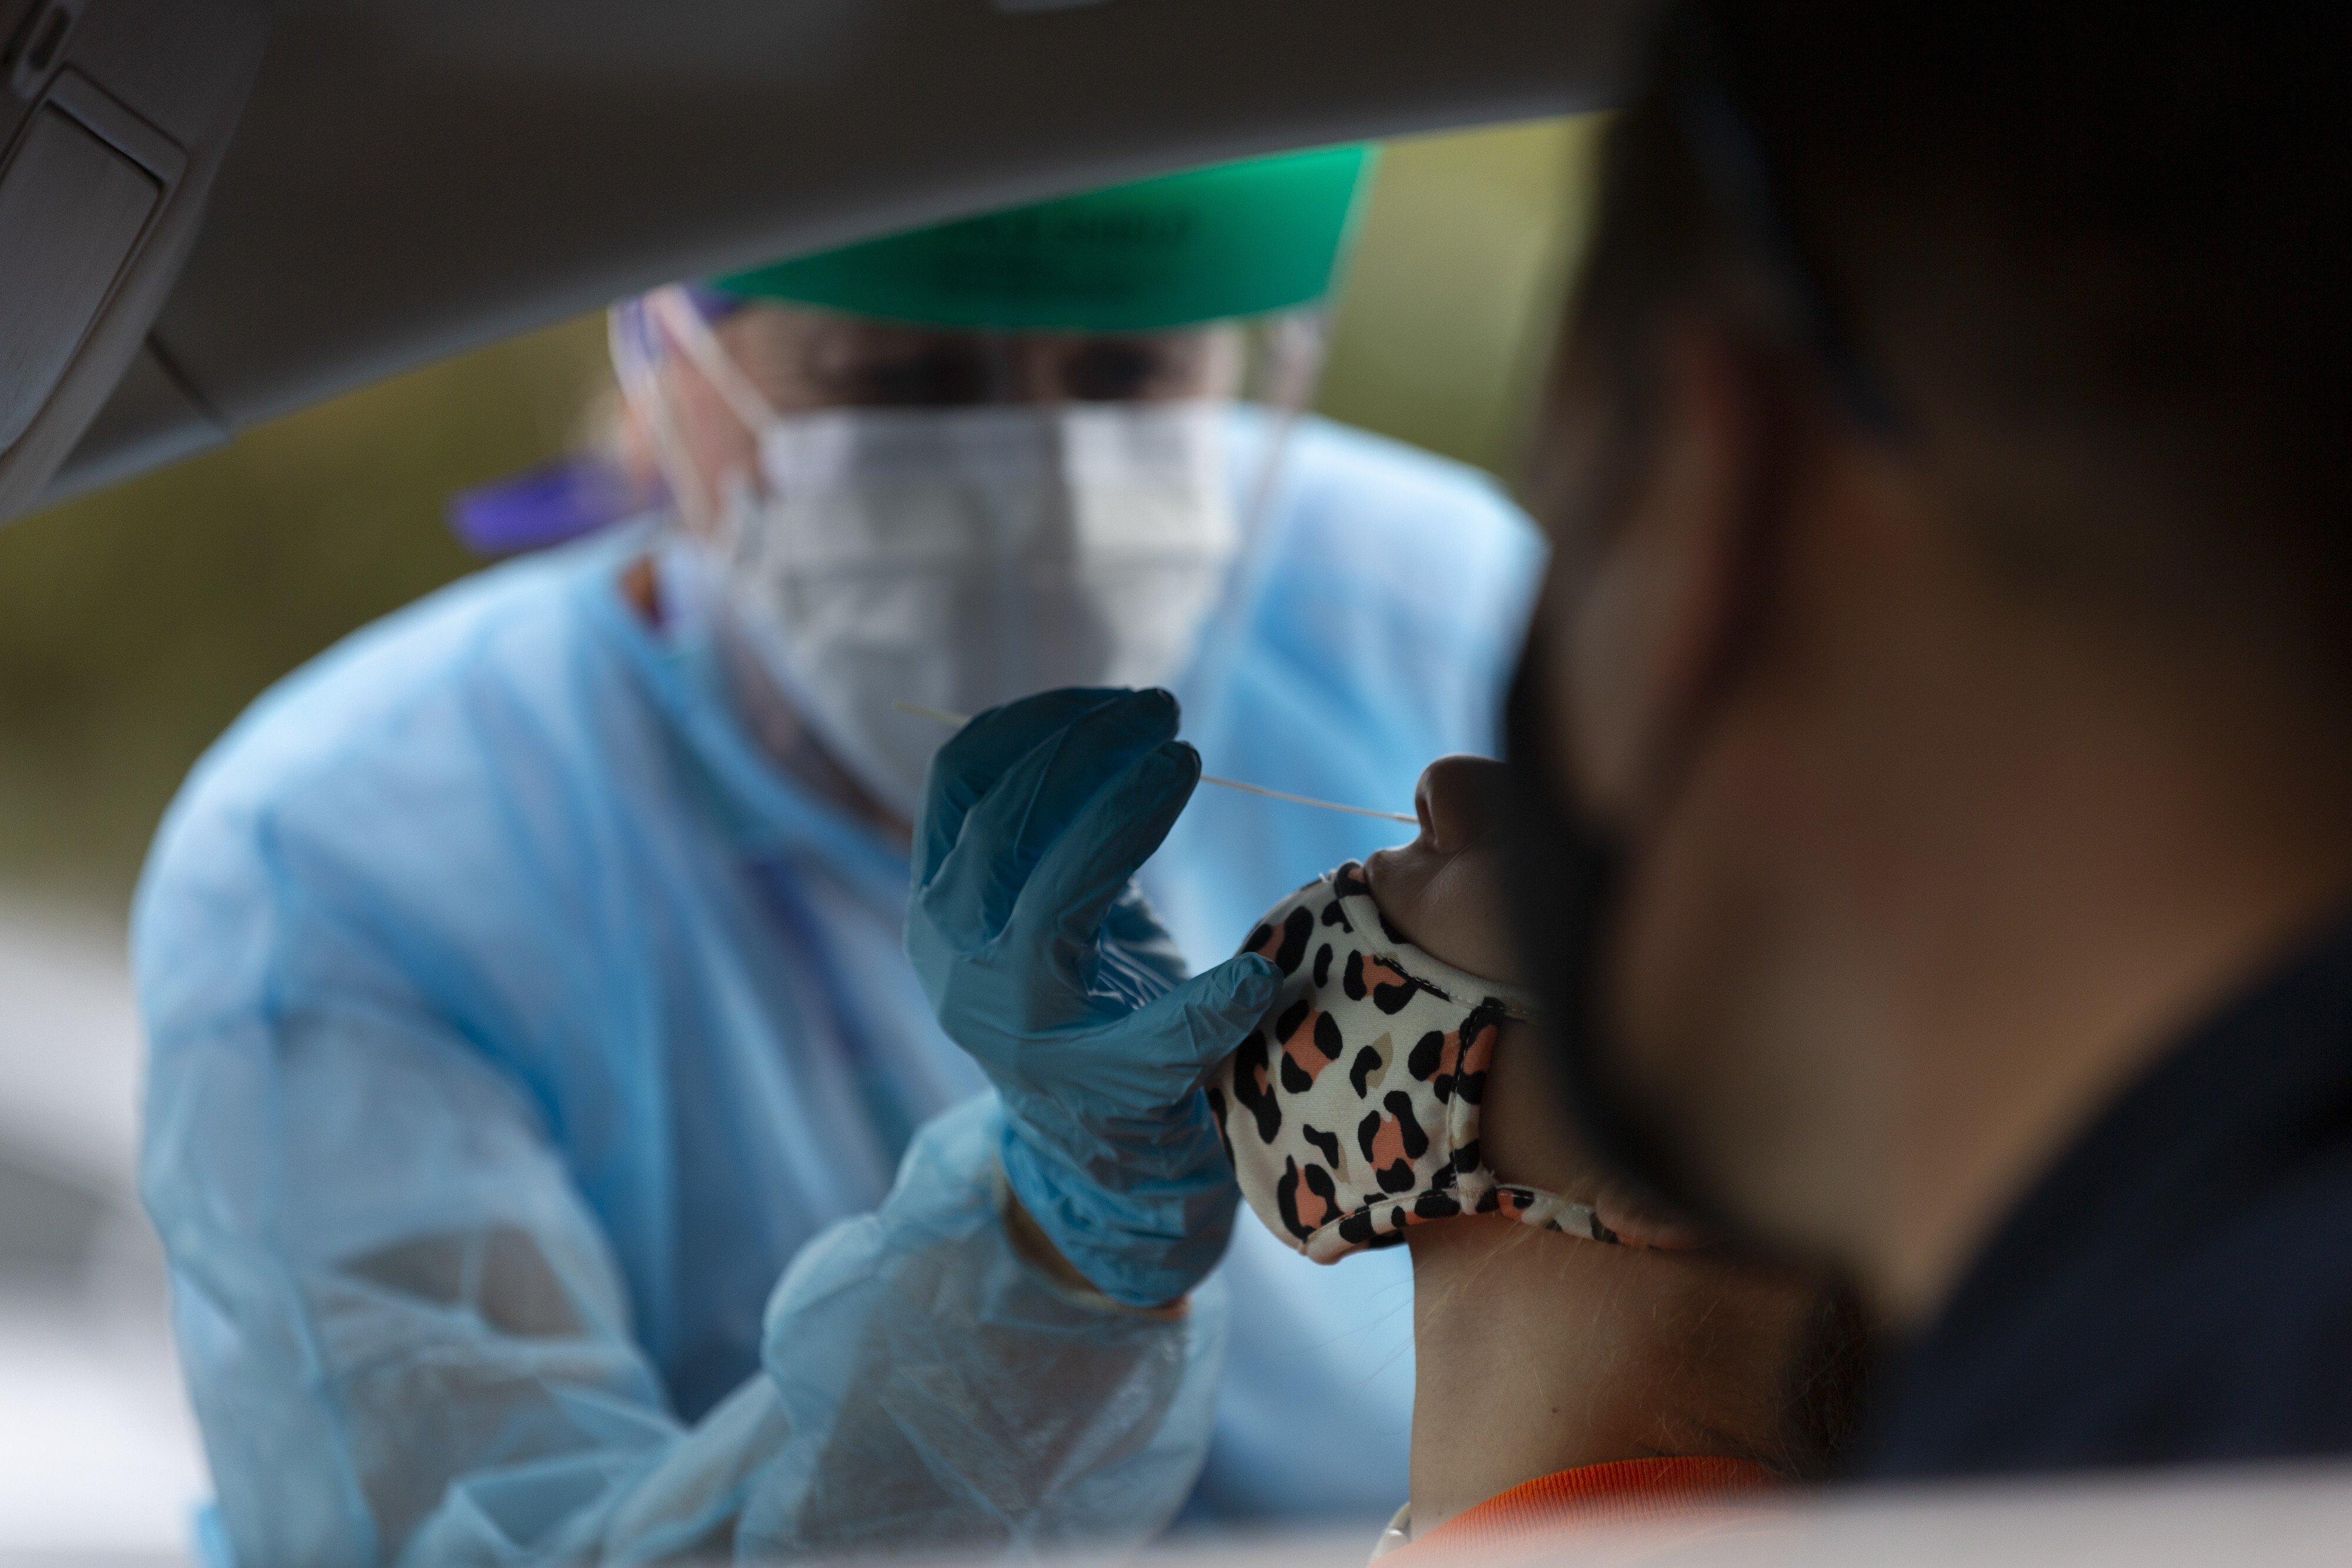 A healthcare worker wearing personal protective equipment (PPE) administers a test at an El Rio Health Covid-19 drive-thru testing site in Tucson, Arizona. Photo: Bloomberg